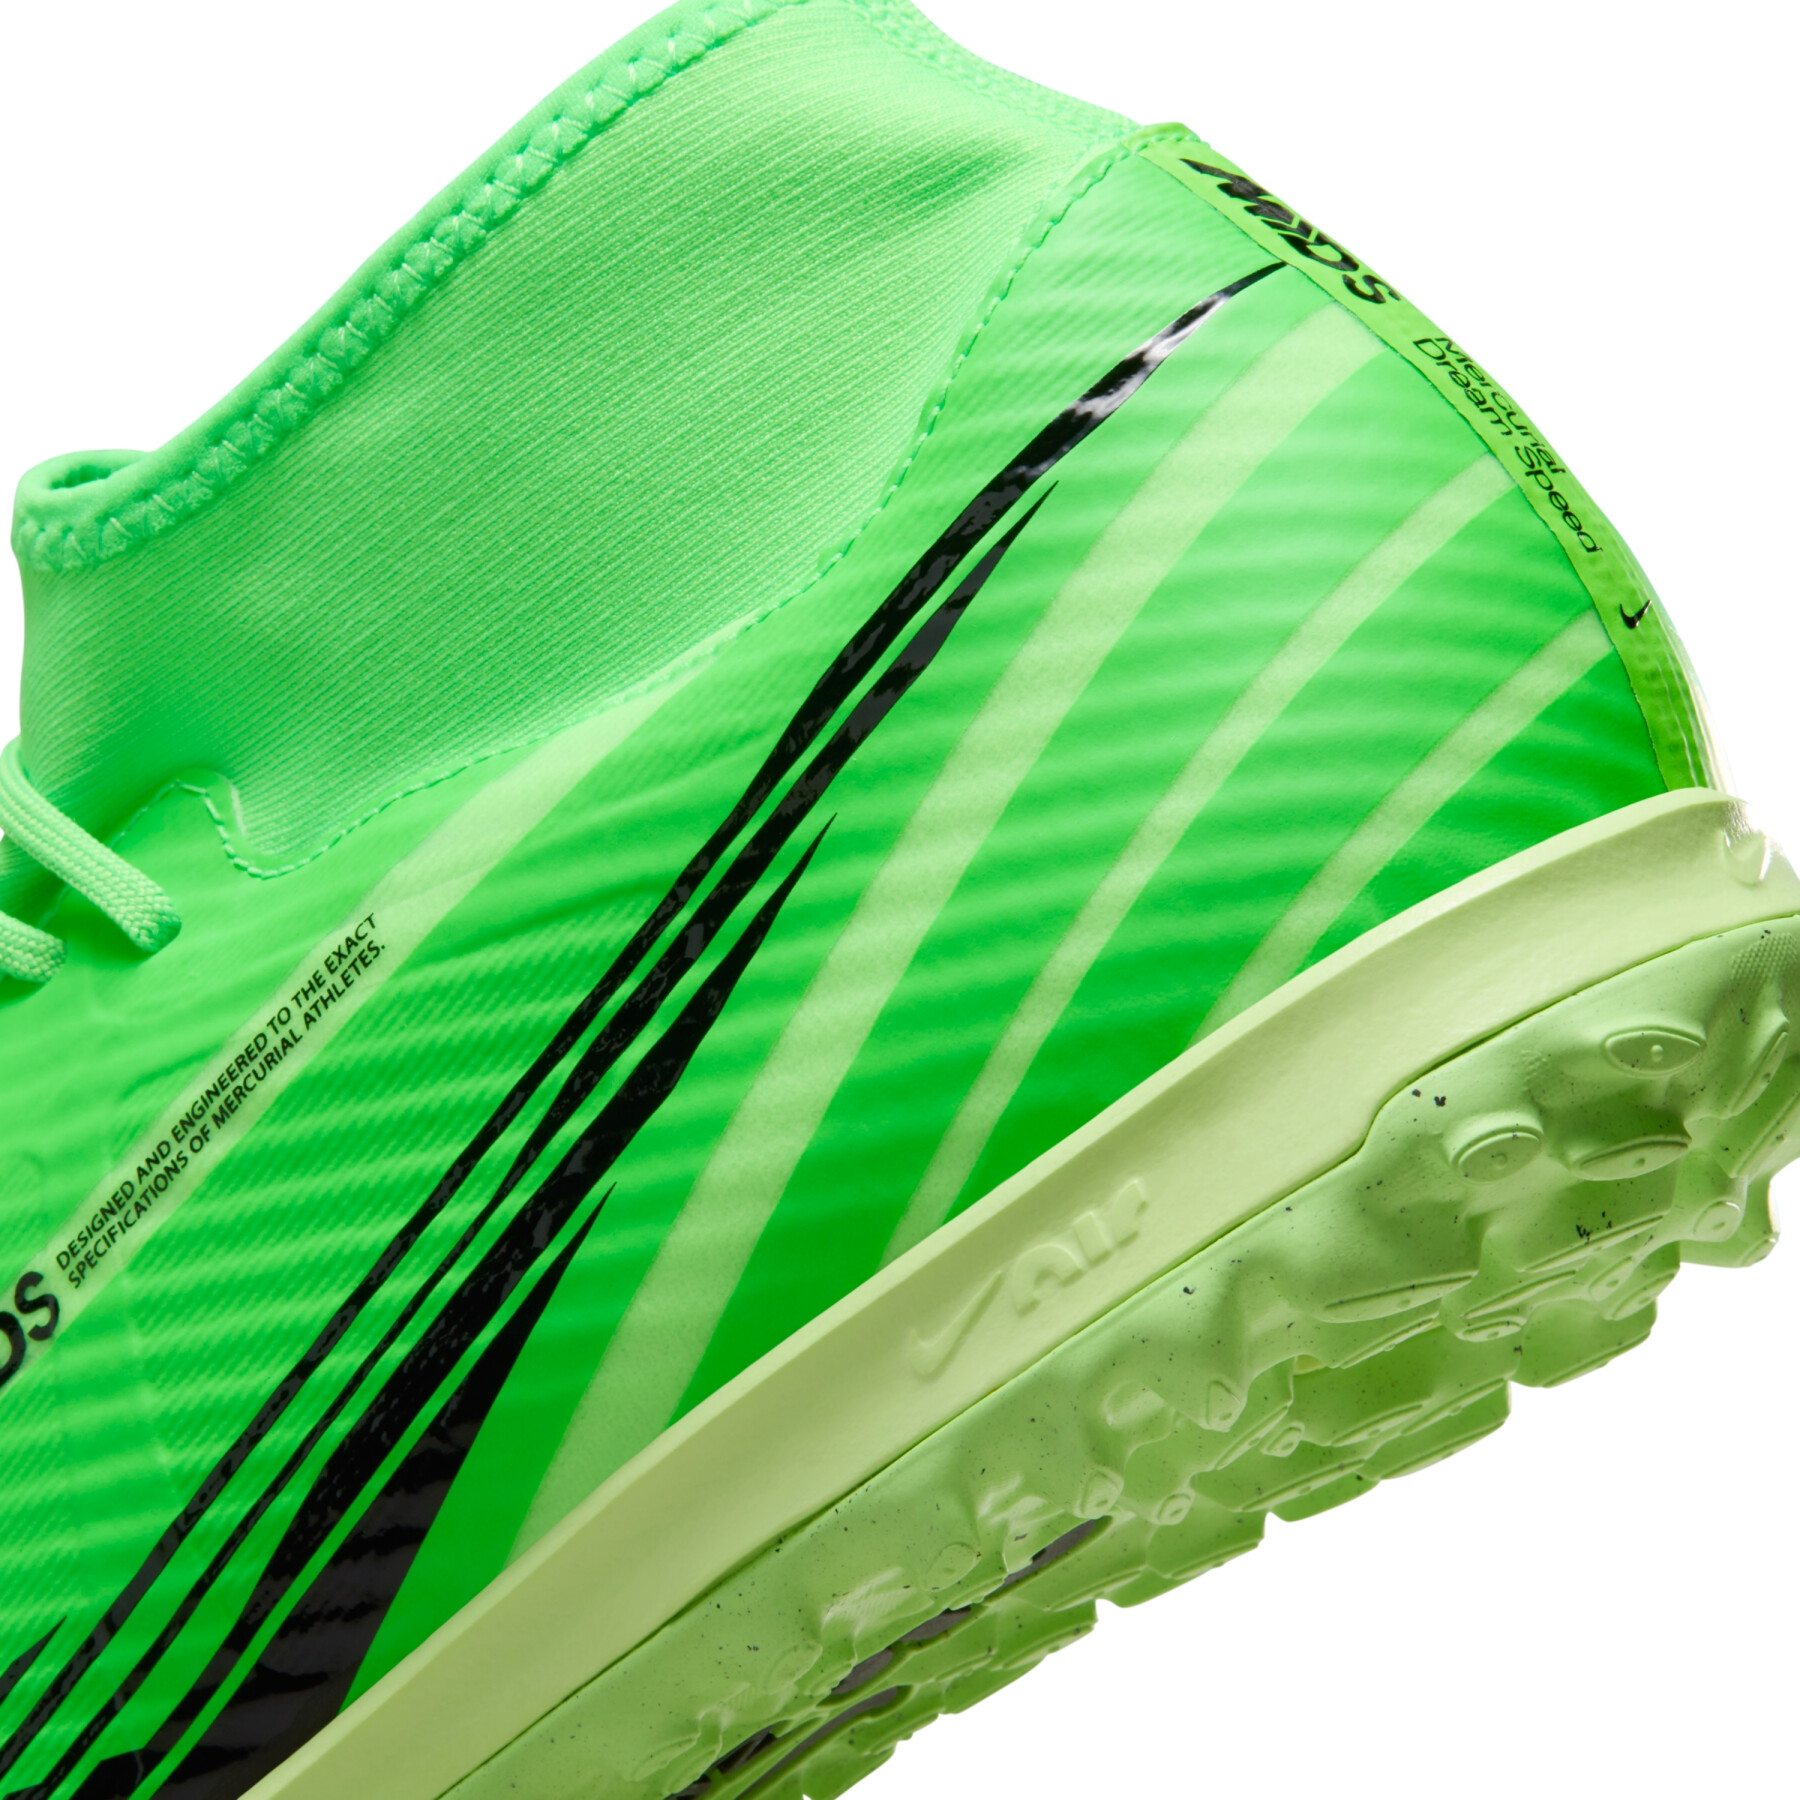 Voetbalschoenen Nike Zoom Superfly 9 Academy MDS TF